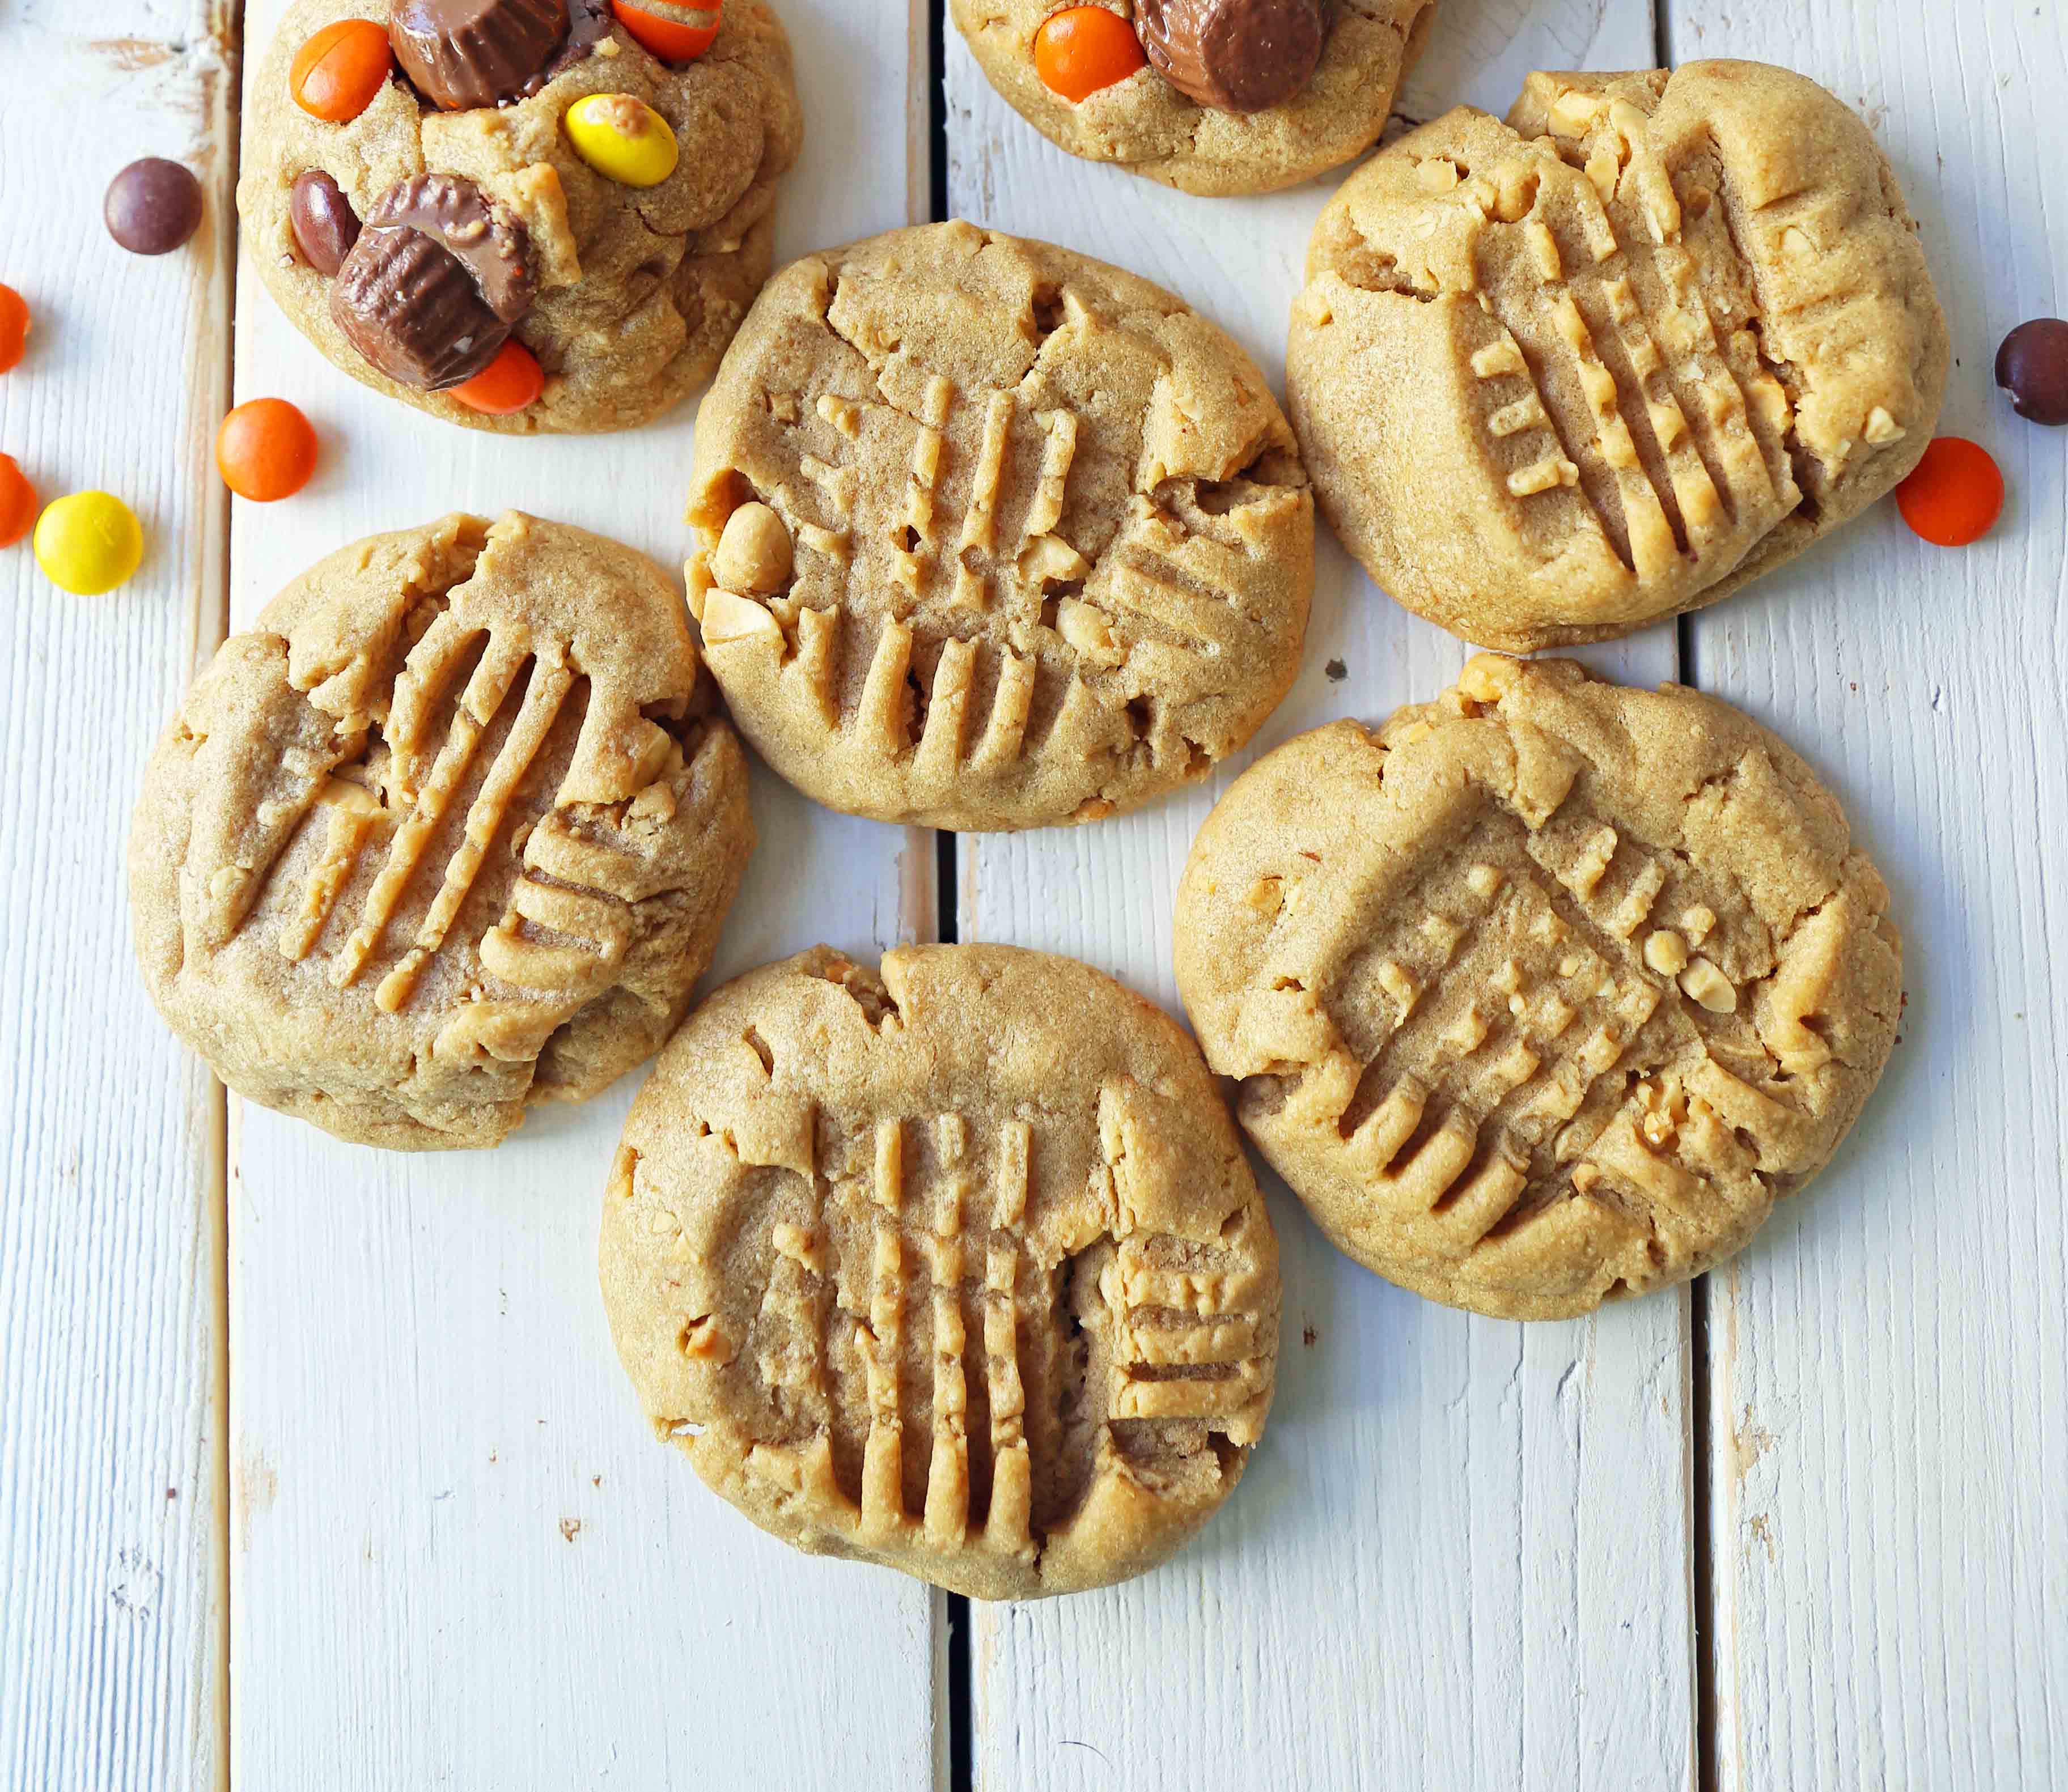 Soft Chewy Peanut Butter Cookies. How to make the perfect peanut butter cookie. www.modernhoney.com #peanutbutter #peanutbuttercookies #softpeanutbuttercookies #chewypeanutbuttercookies 